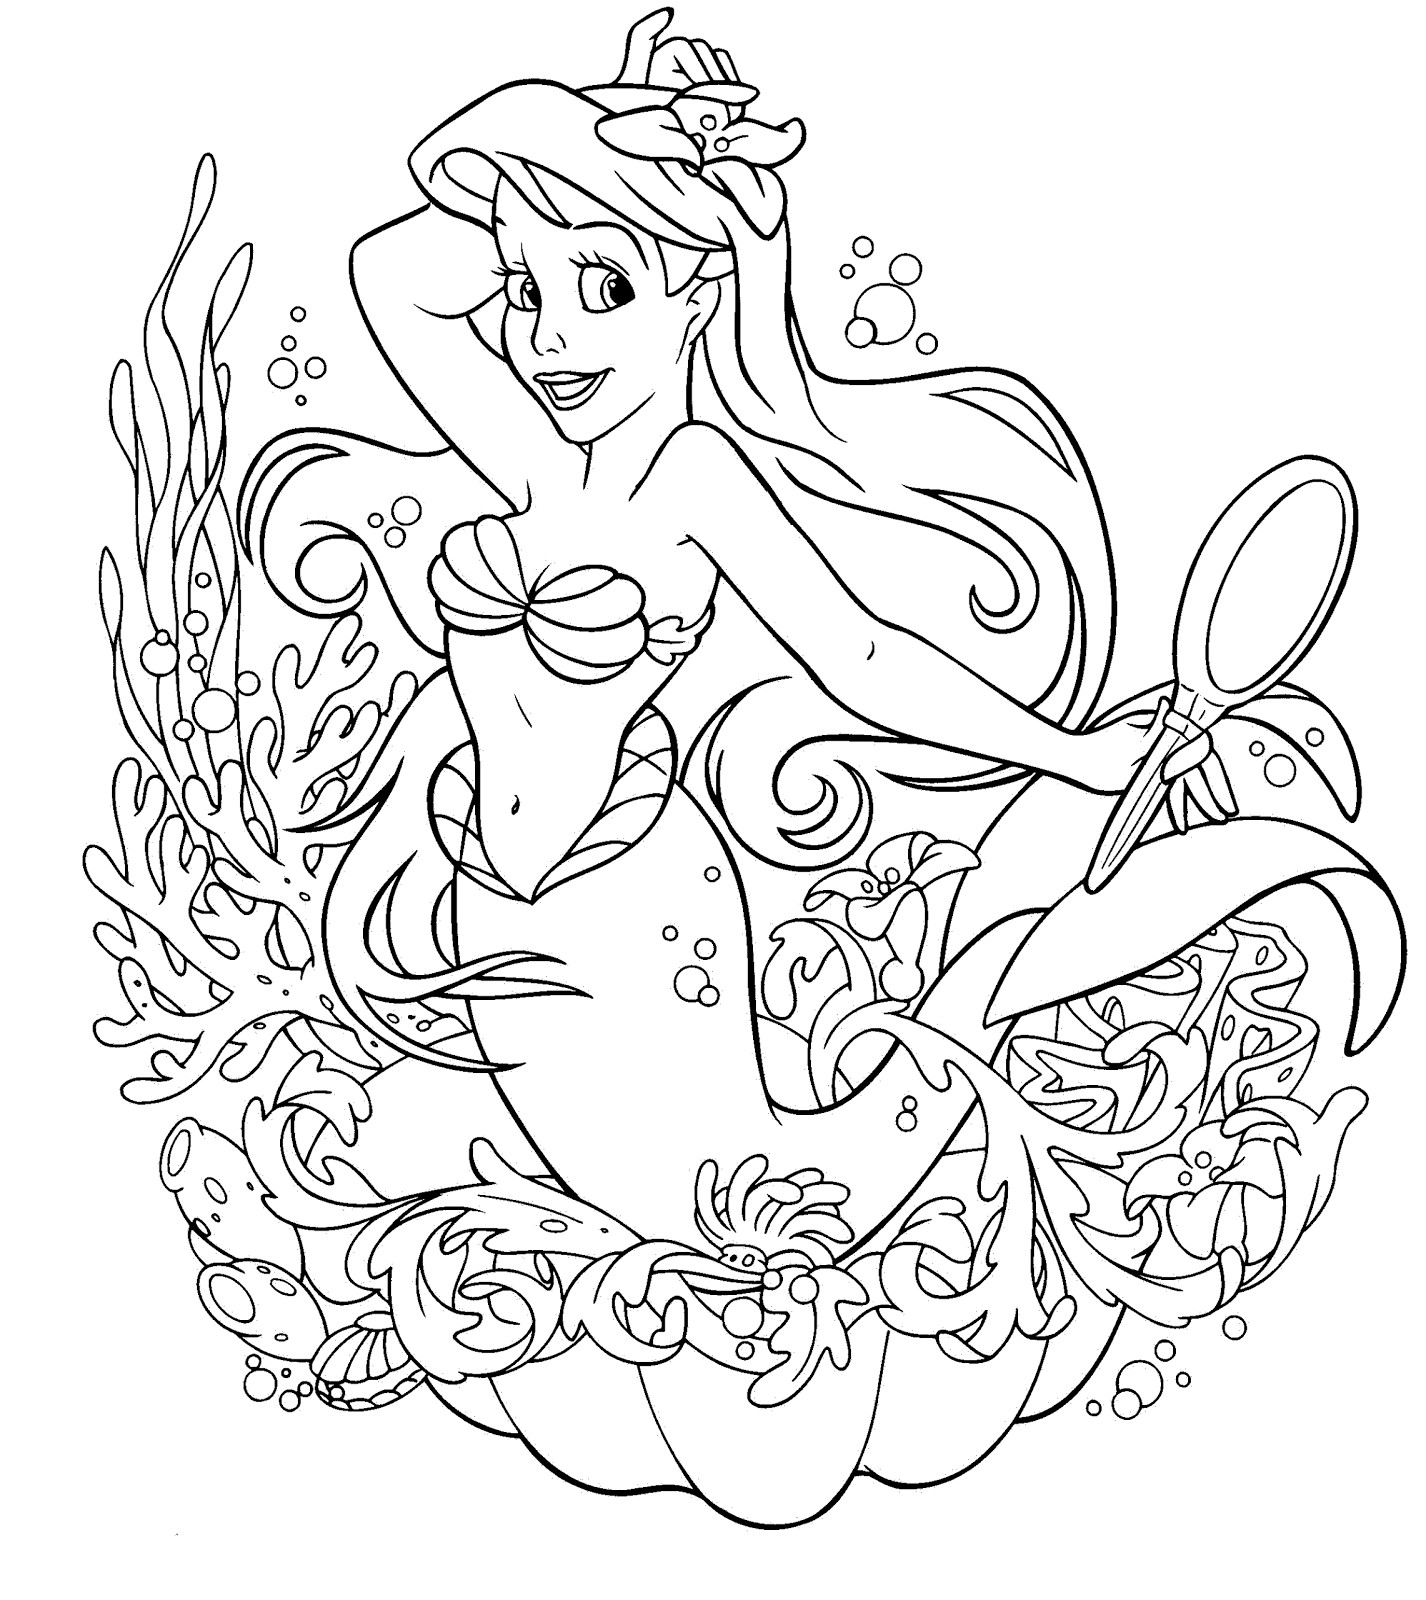 Kids Coloring Pages Mermaid
 Mermaid Birthday Party Coloring Pages